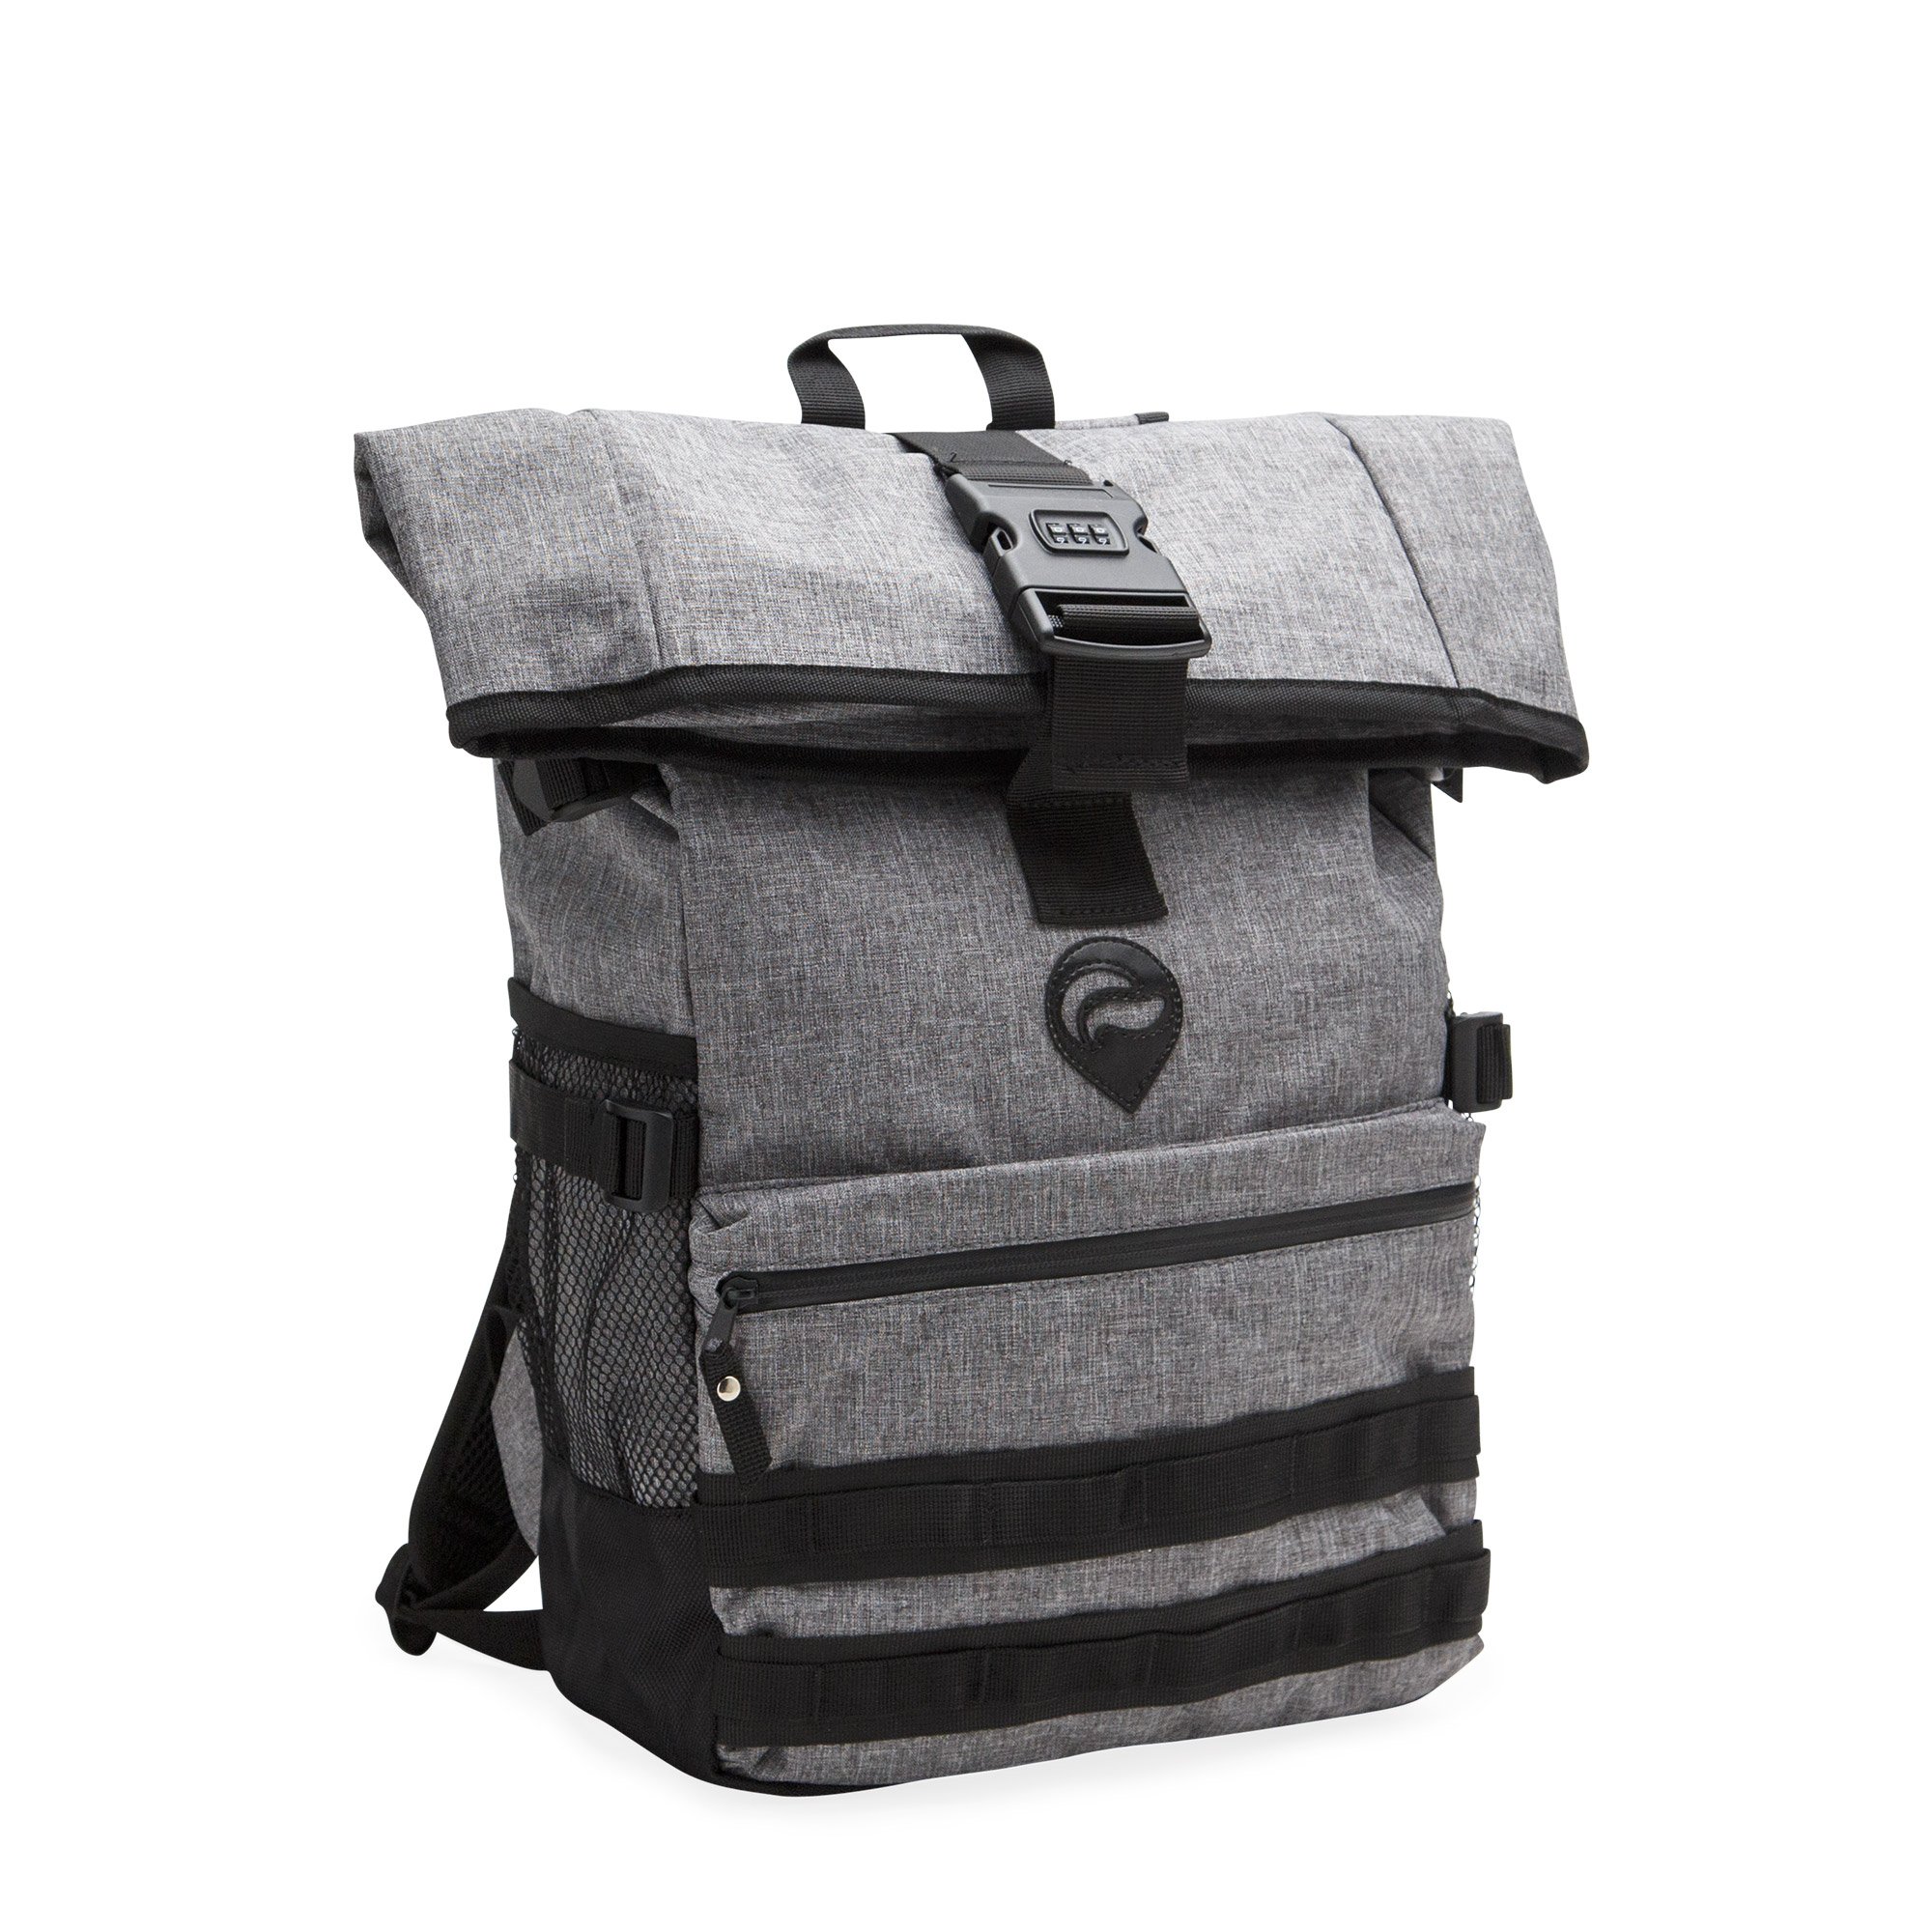 WATER RESISTANT 18"X12"X6" Details about   SNIFFY SMELL PROOF CARBON BACKPACK WITH SMART LOCK 